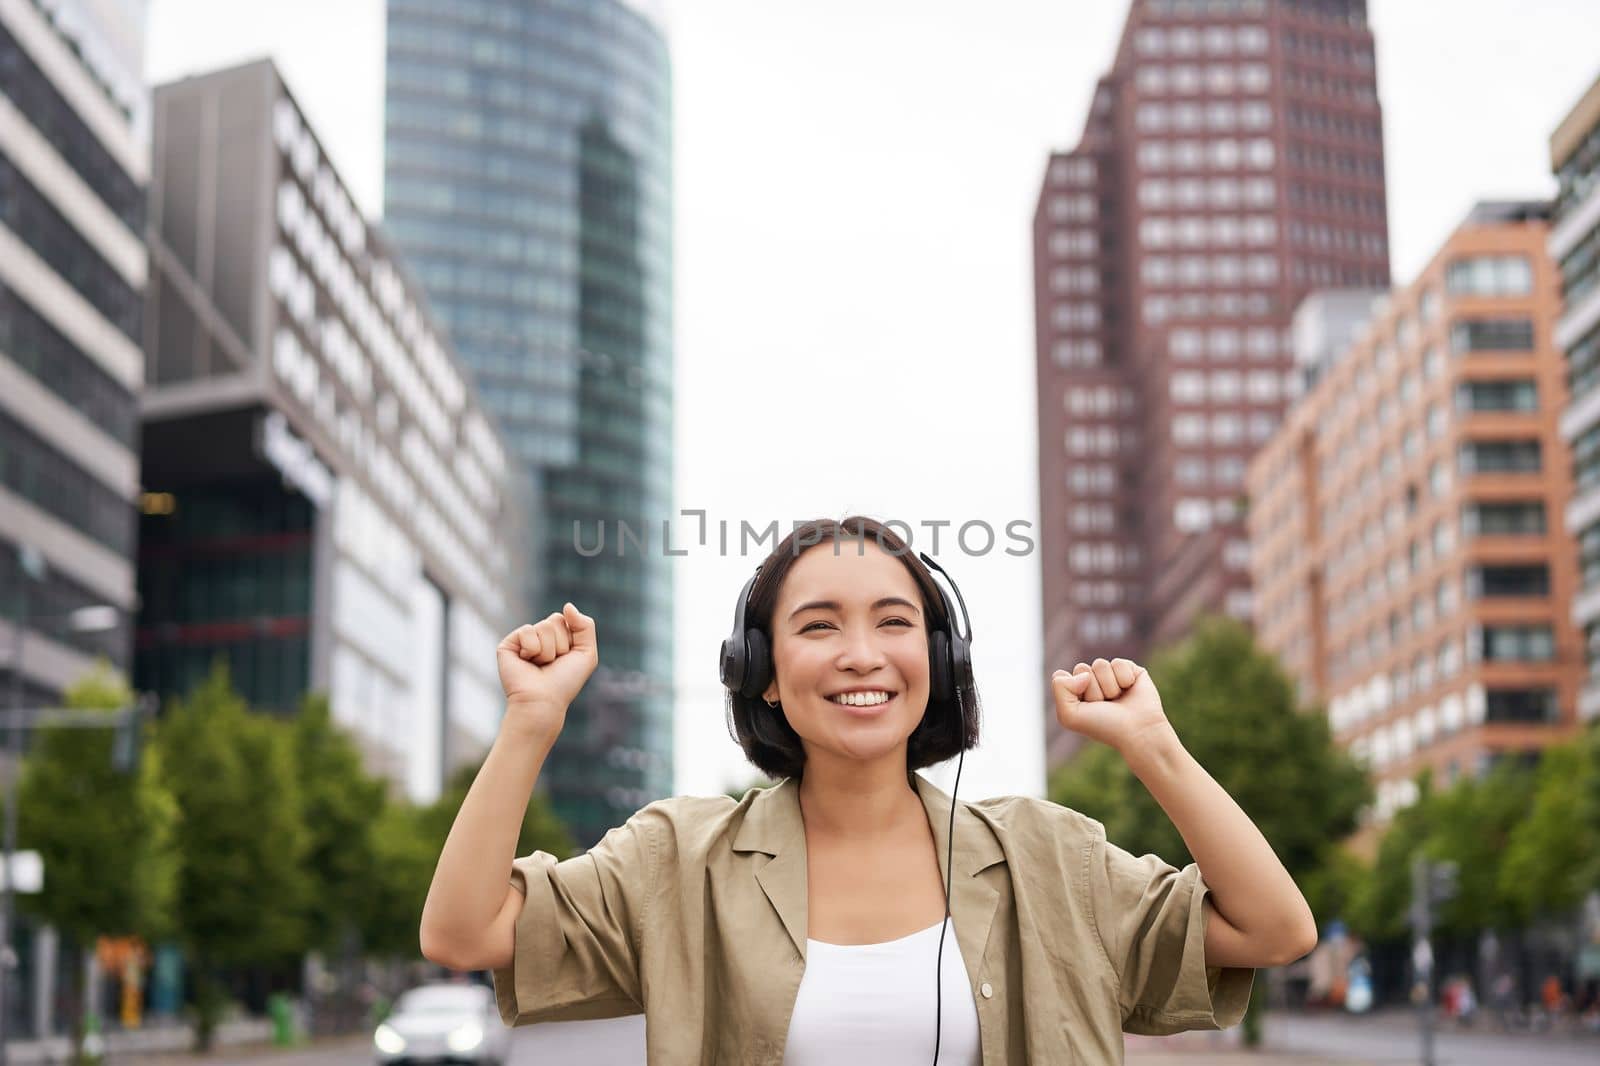 Portrait of smiling asian woman dancing, triumphing, feeling happy while listening music in city, posing on street near skyscrappers.